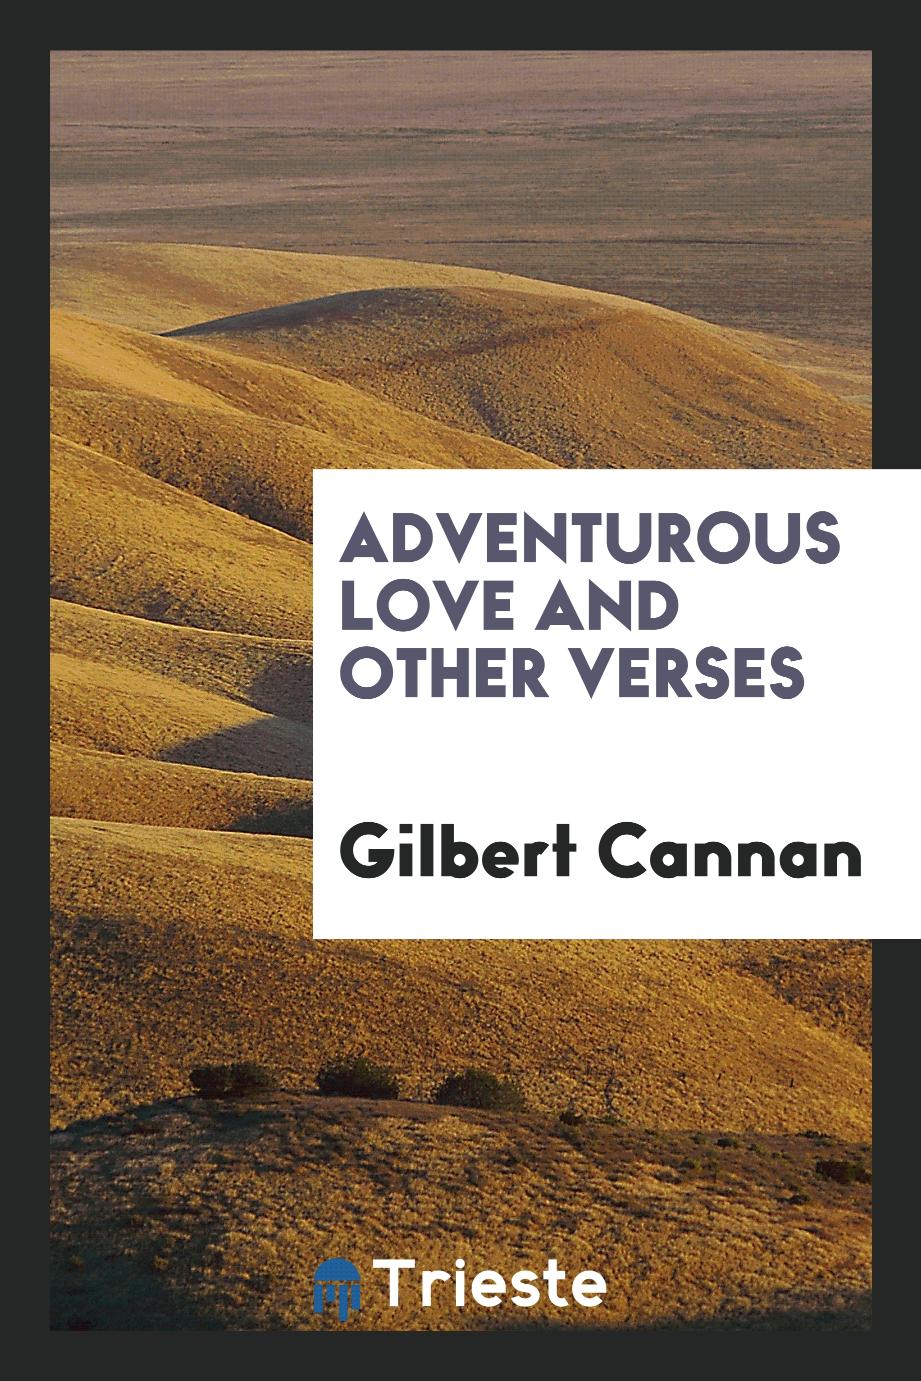 Adventurous love and other verses